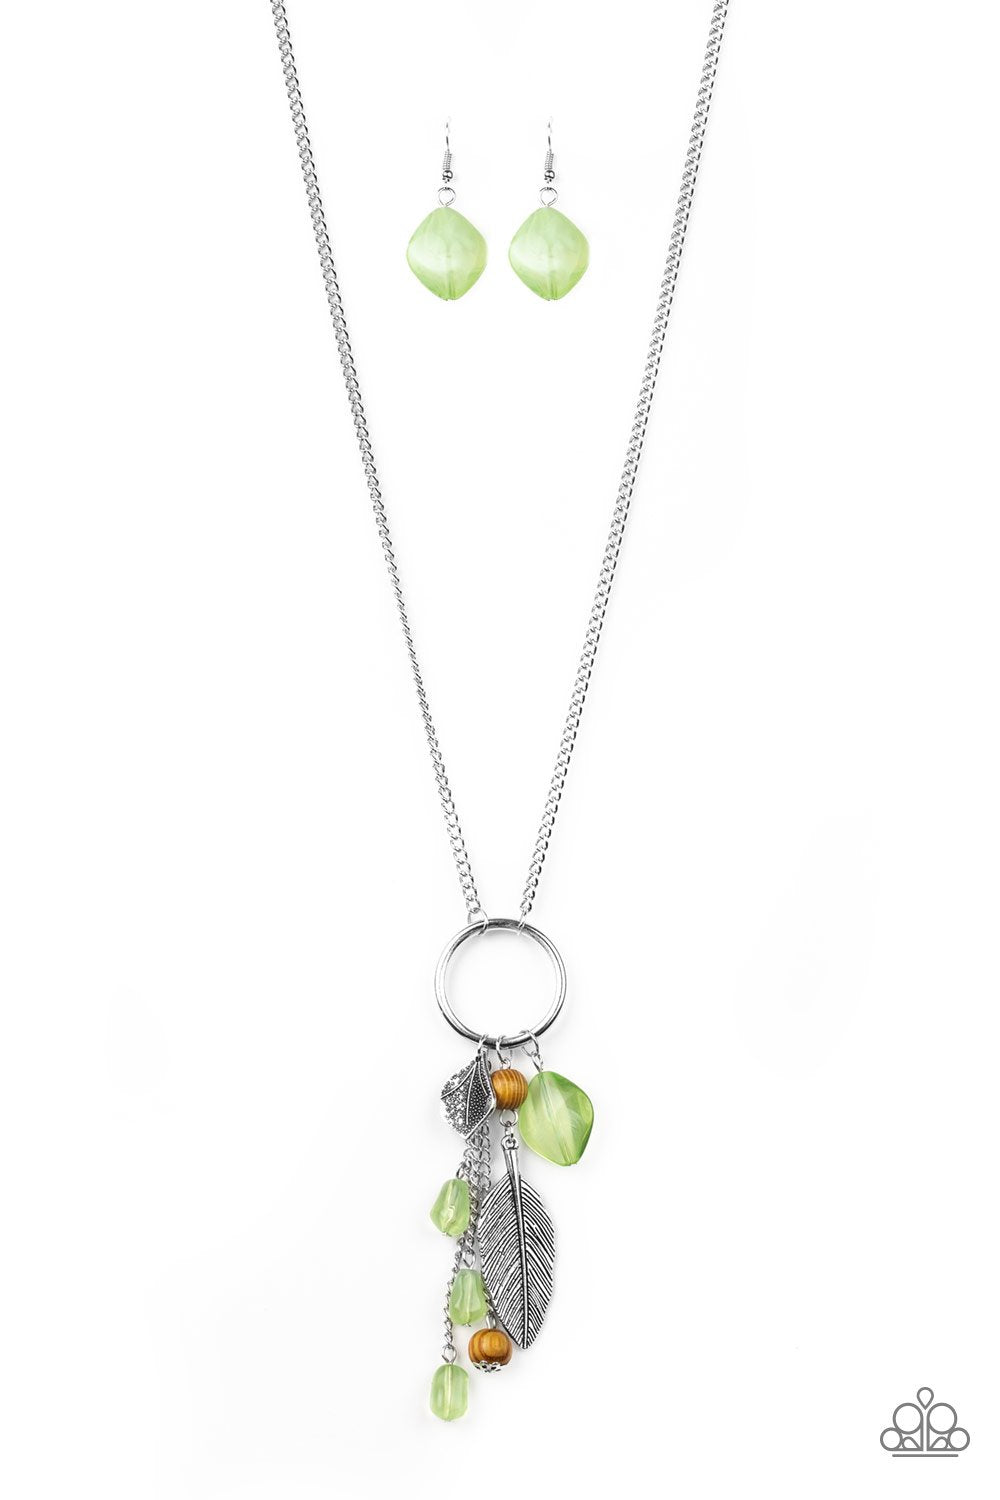 Sky High Style Green and Silver Feather Charm Necklace - Paparazzi Accessories-CarasShop.com - $5 Jewelry by Cara Jewels